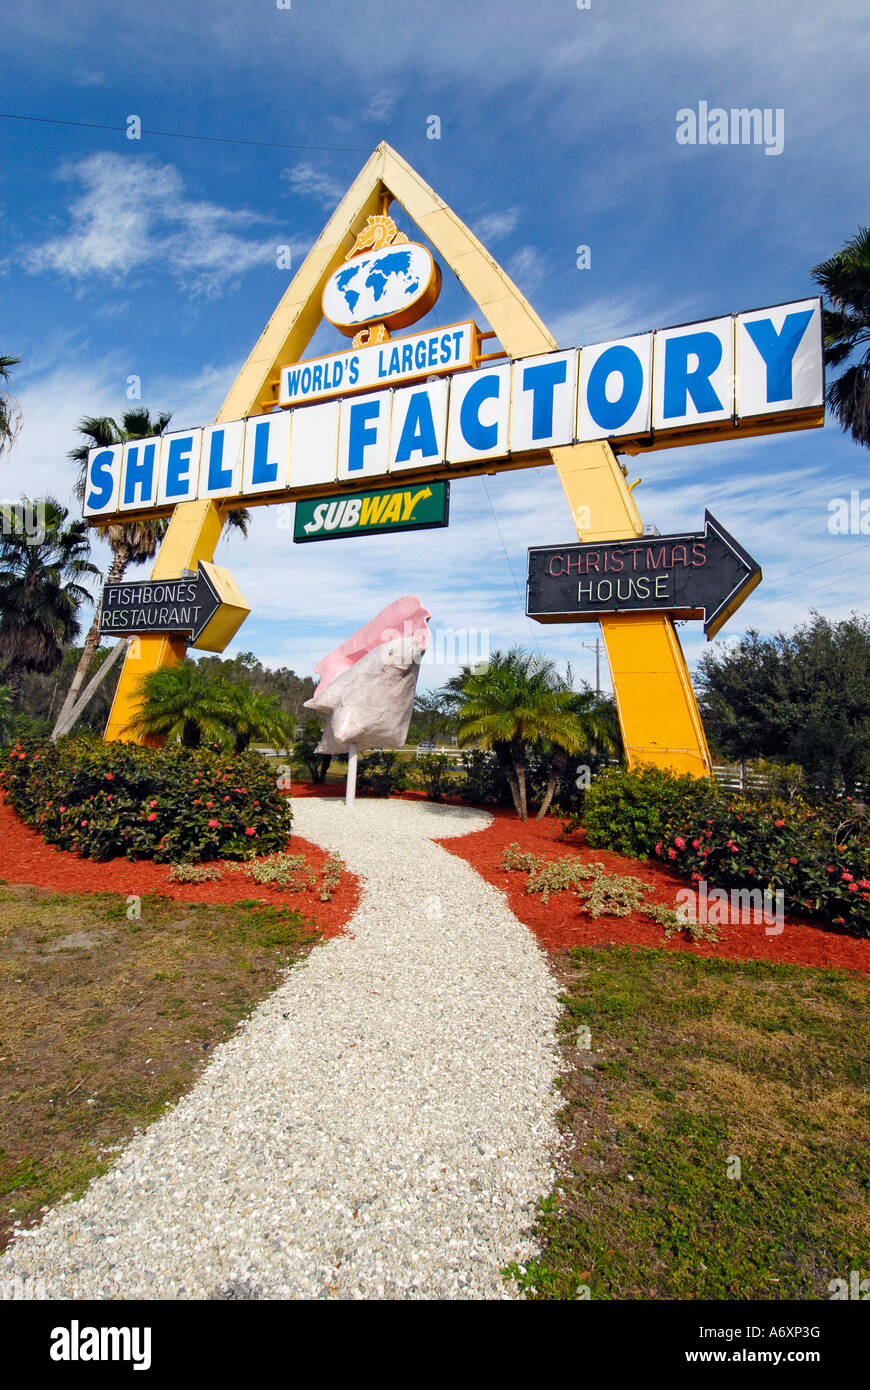 Worlds largest Shell Factory a popular tourist attraction in North Fort FT Myers Florida FL Stock Photo